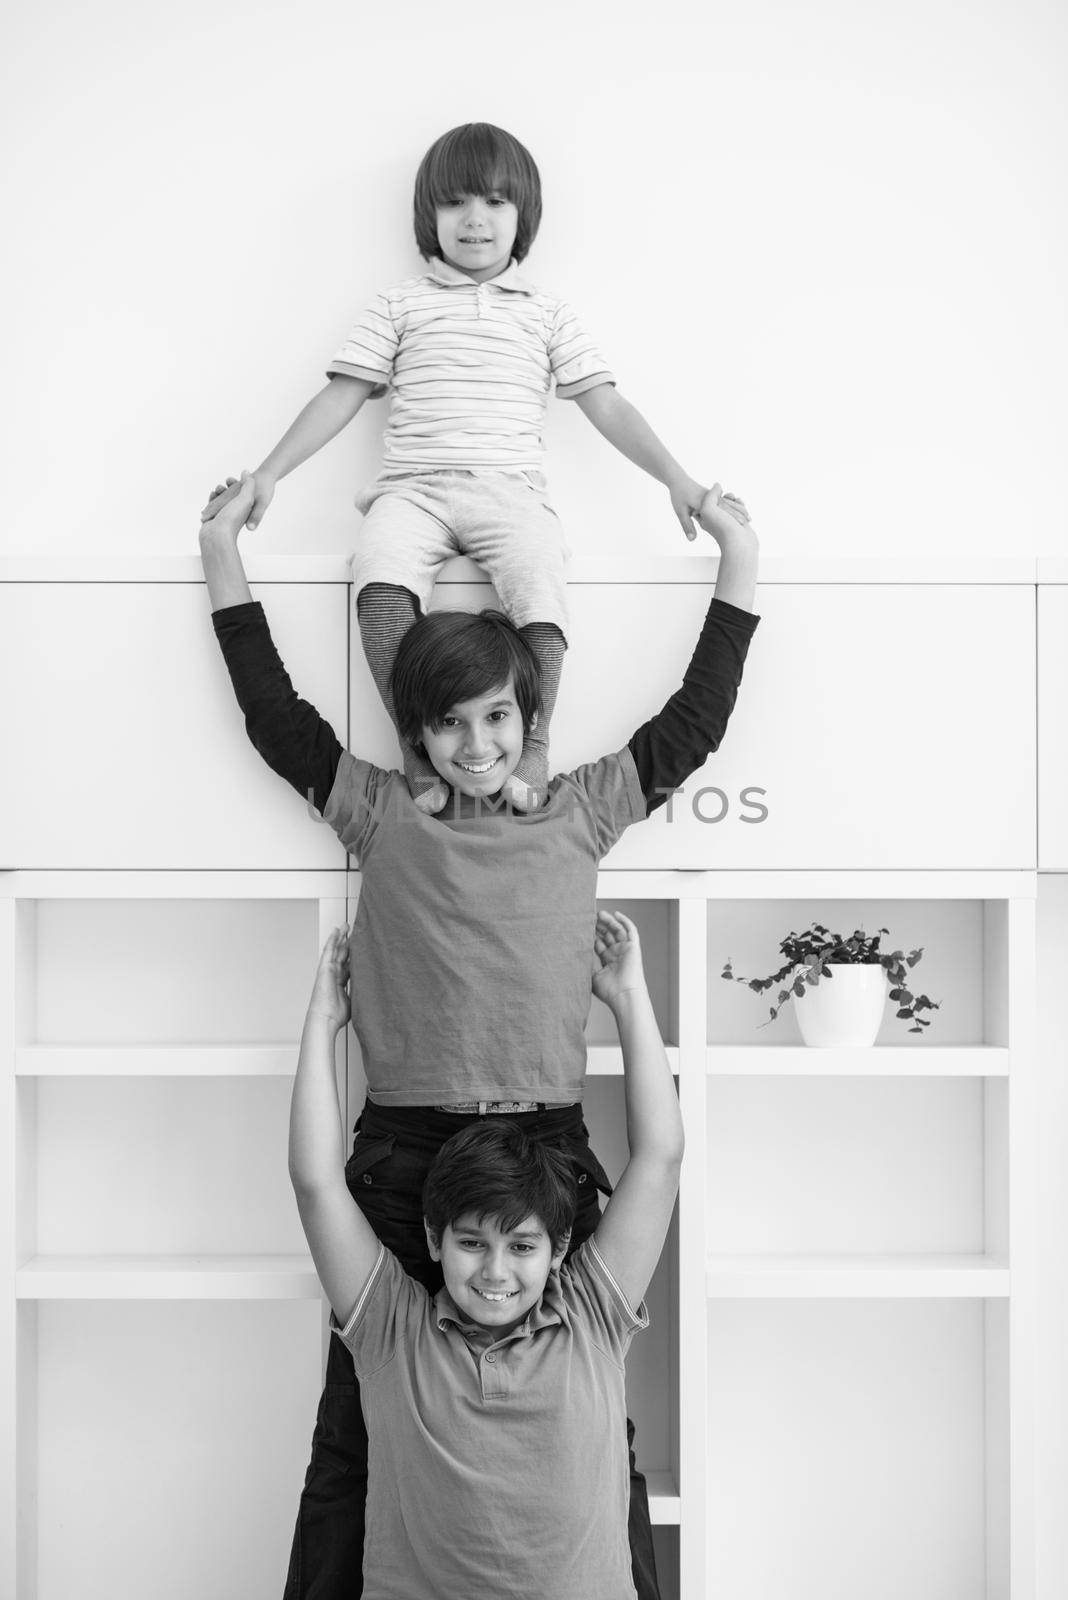 happy young boys having fun and posing line up piggyback in new modern home